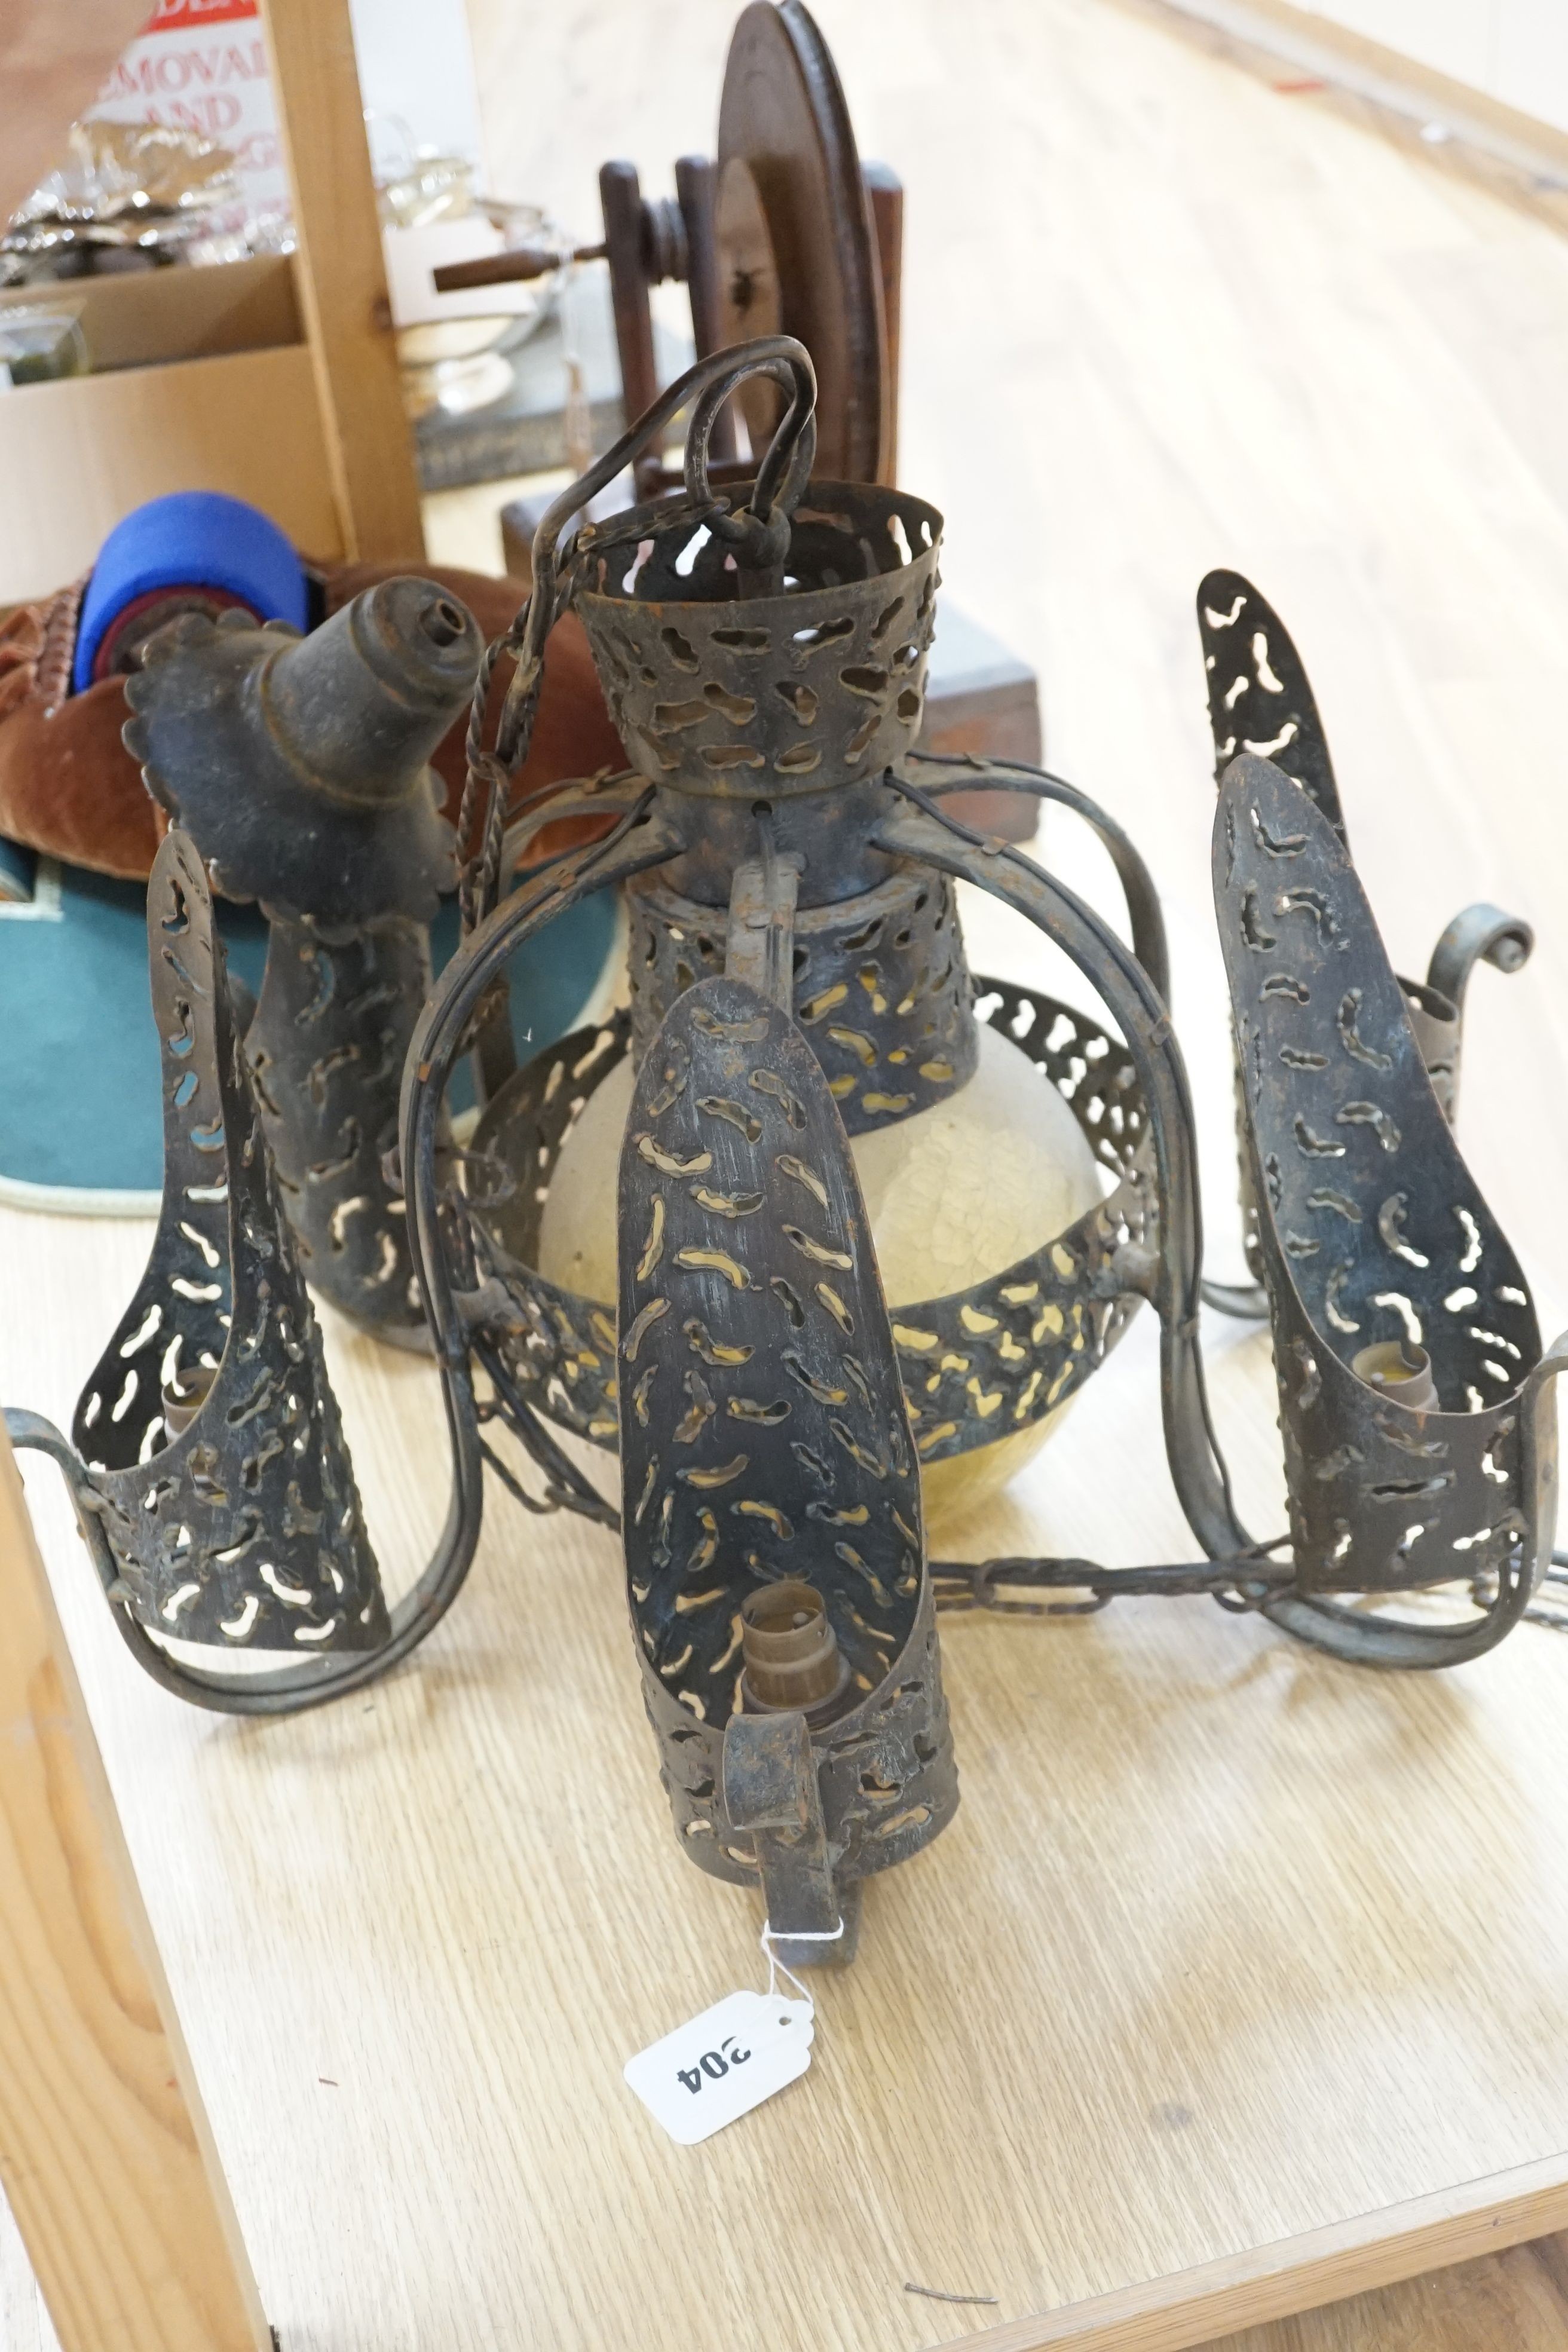 An early 20th century iron chandelier